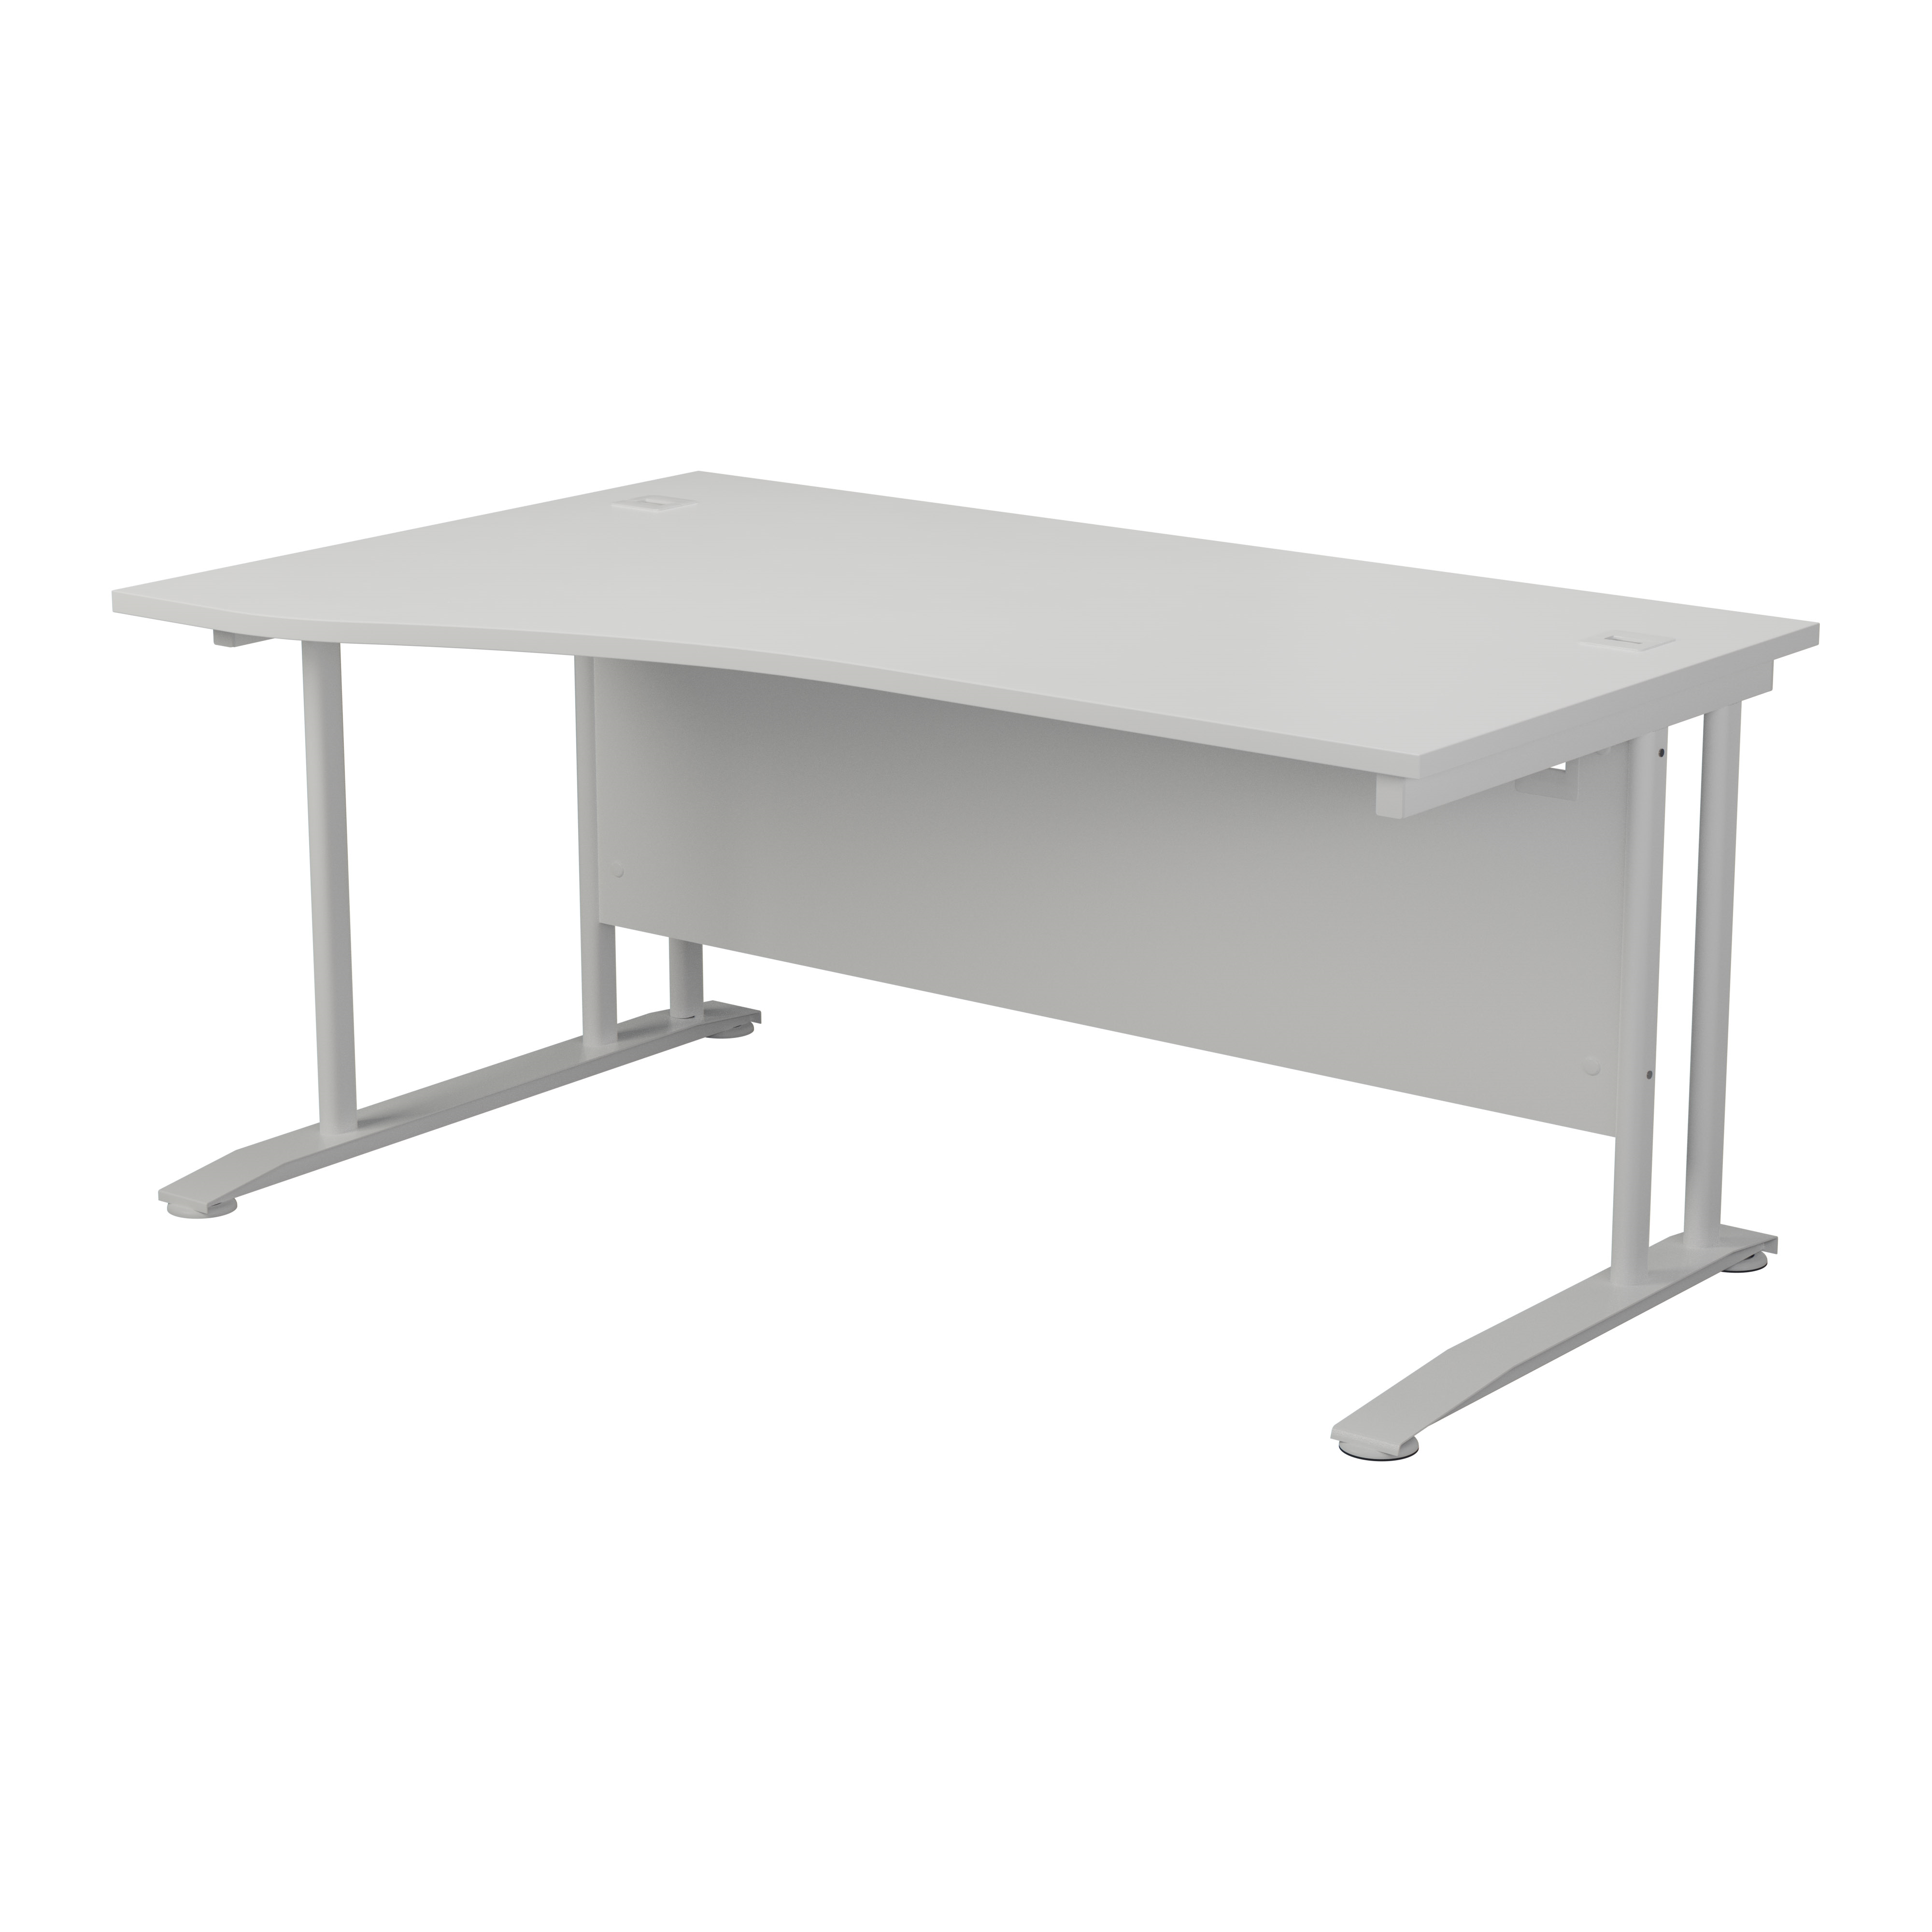 One Cantilever Plus 1600 LH Wave Cantilever Workstation - White Top White Legs